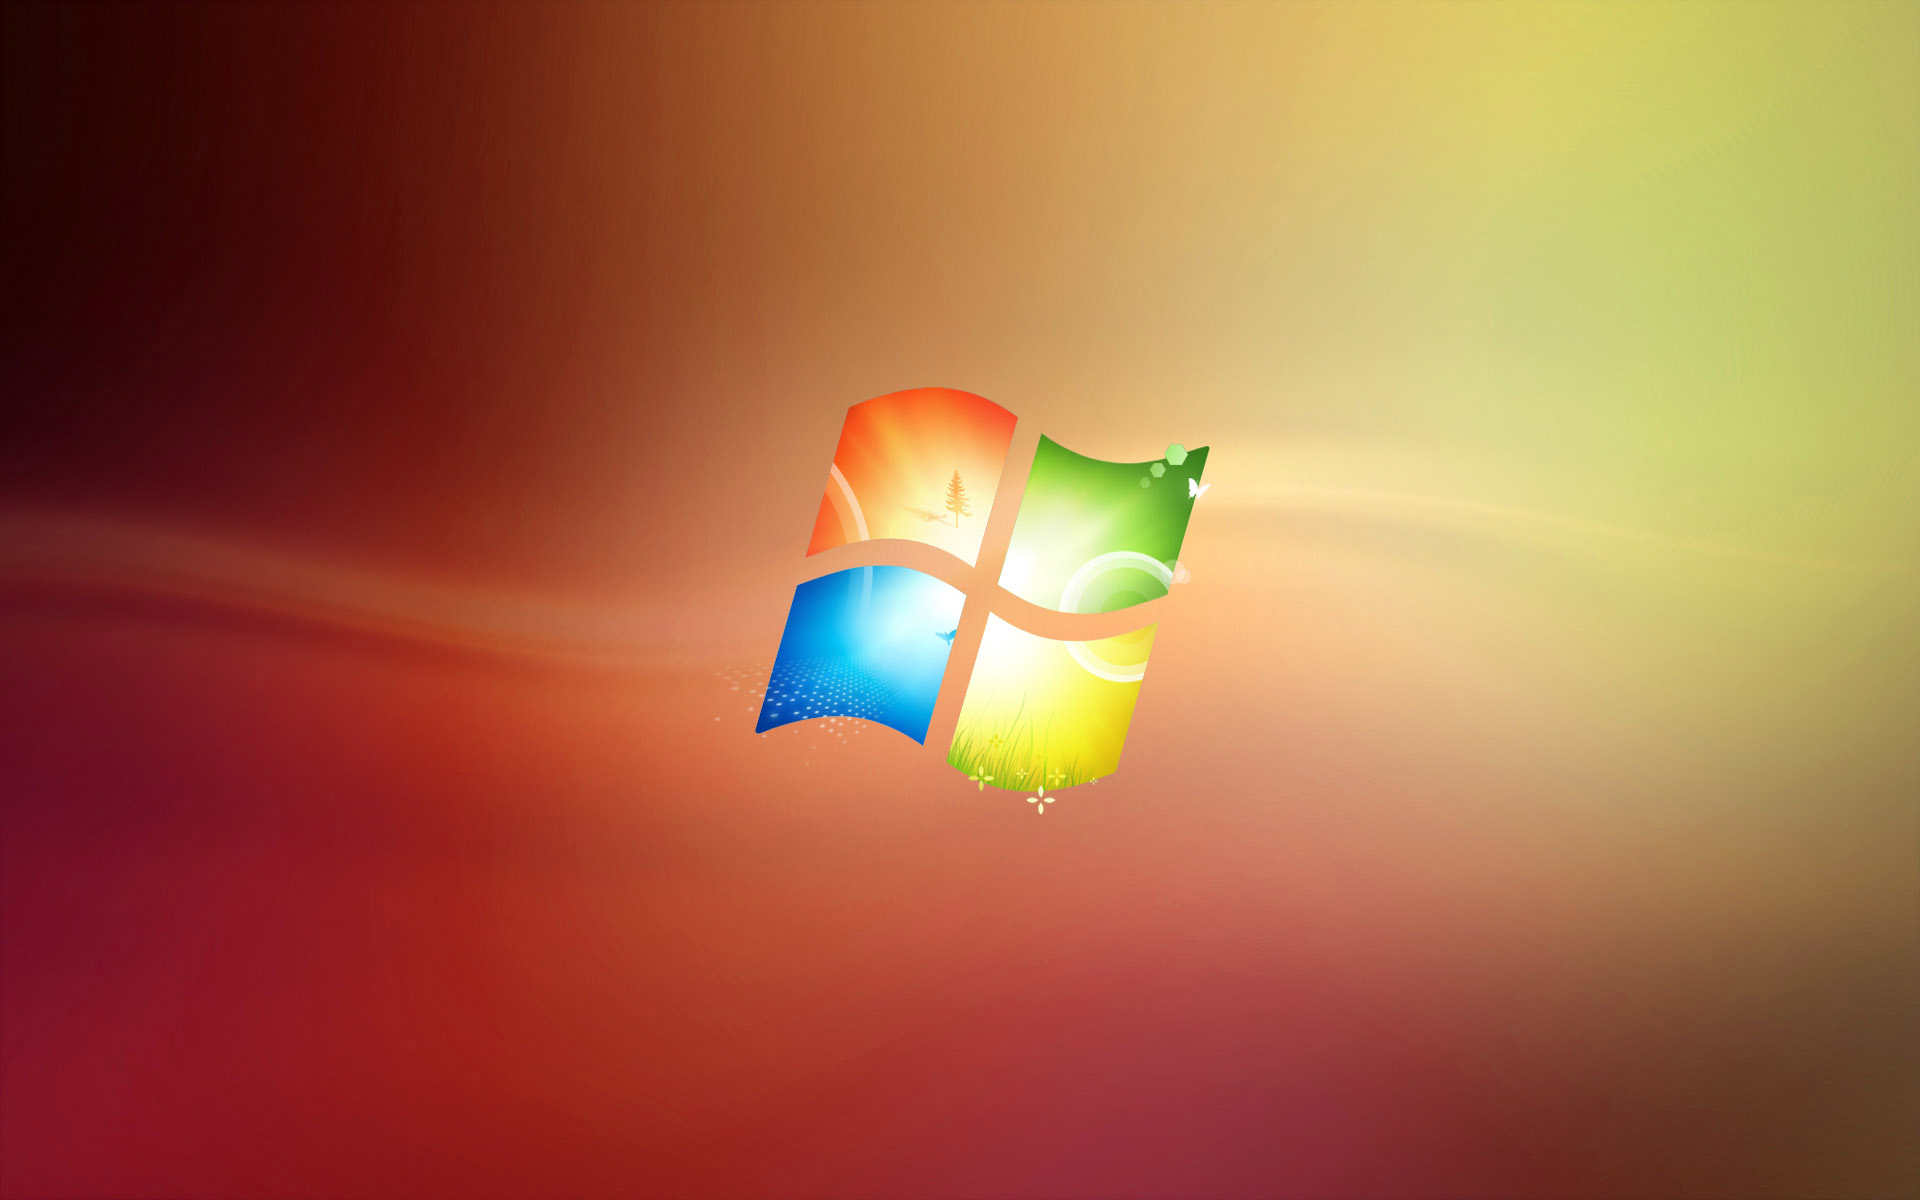 Windows 7 Backgrounds Themes - Wallpaper Zone